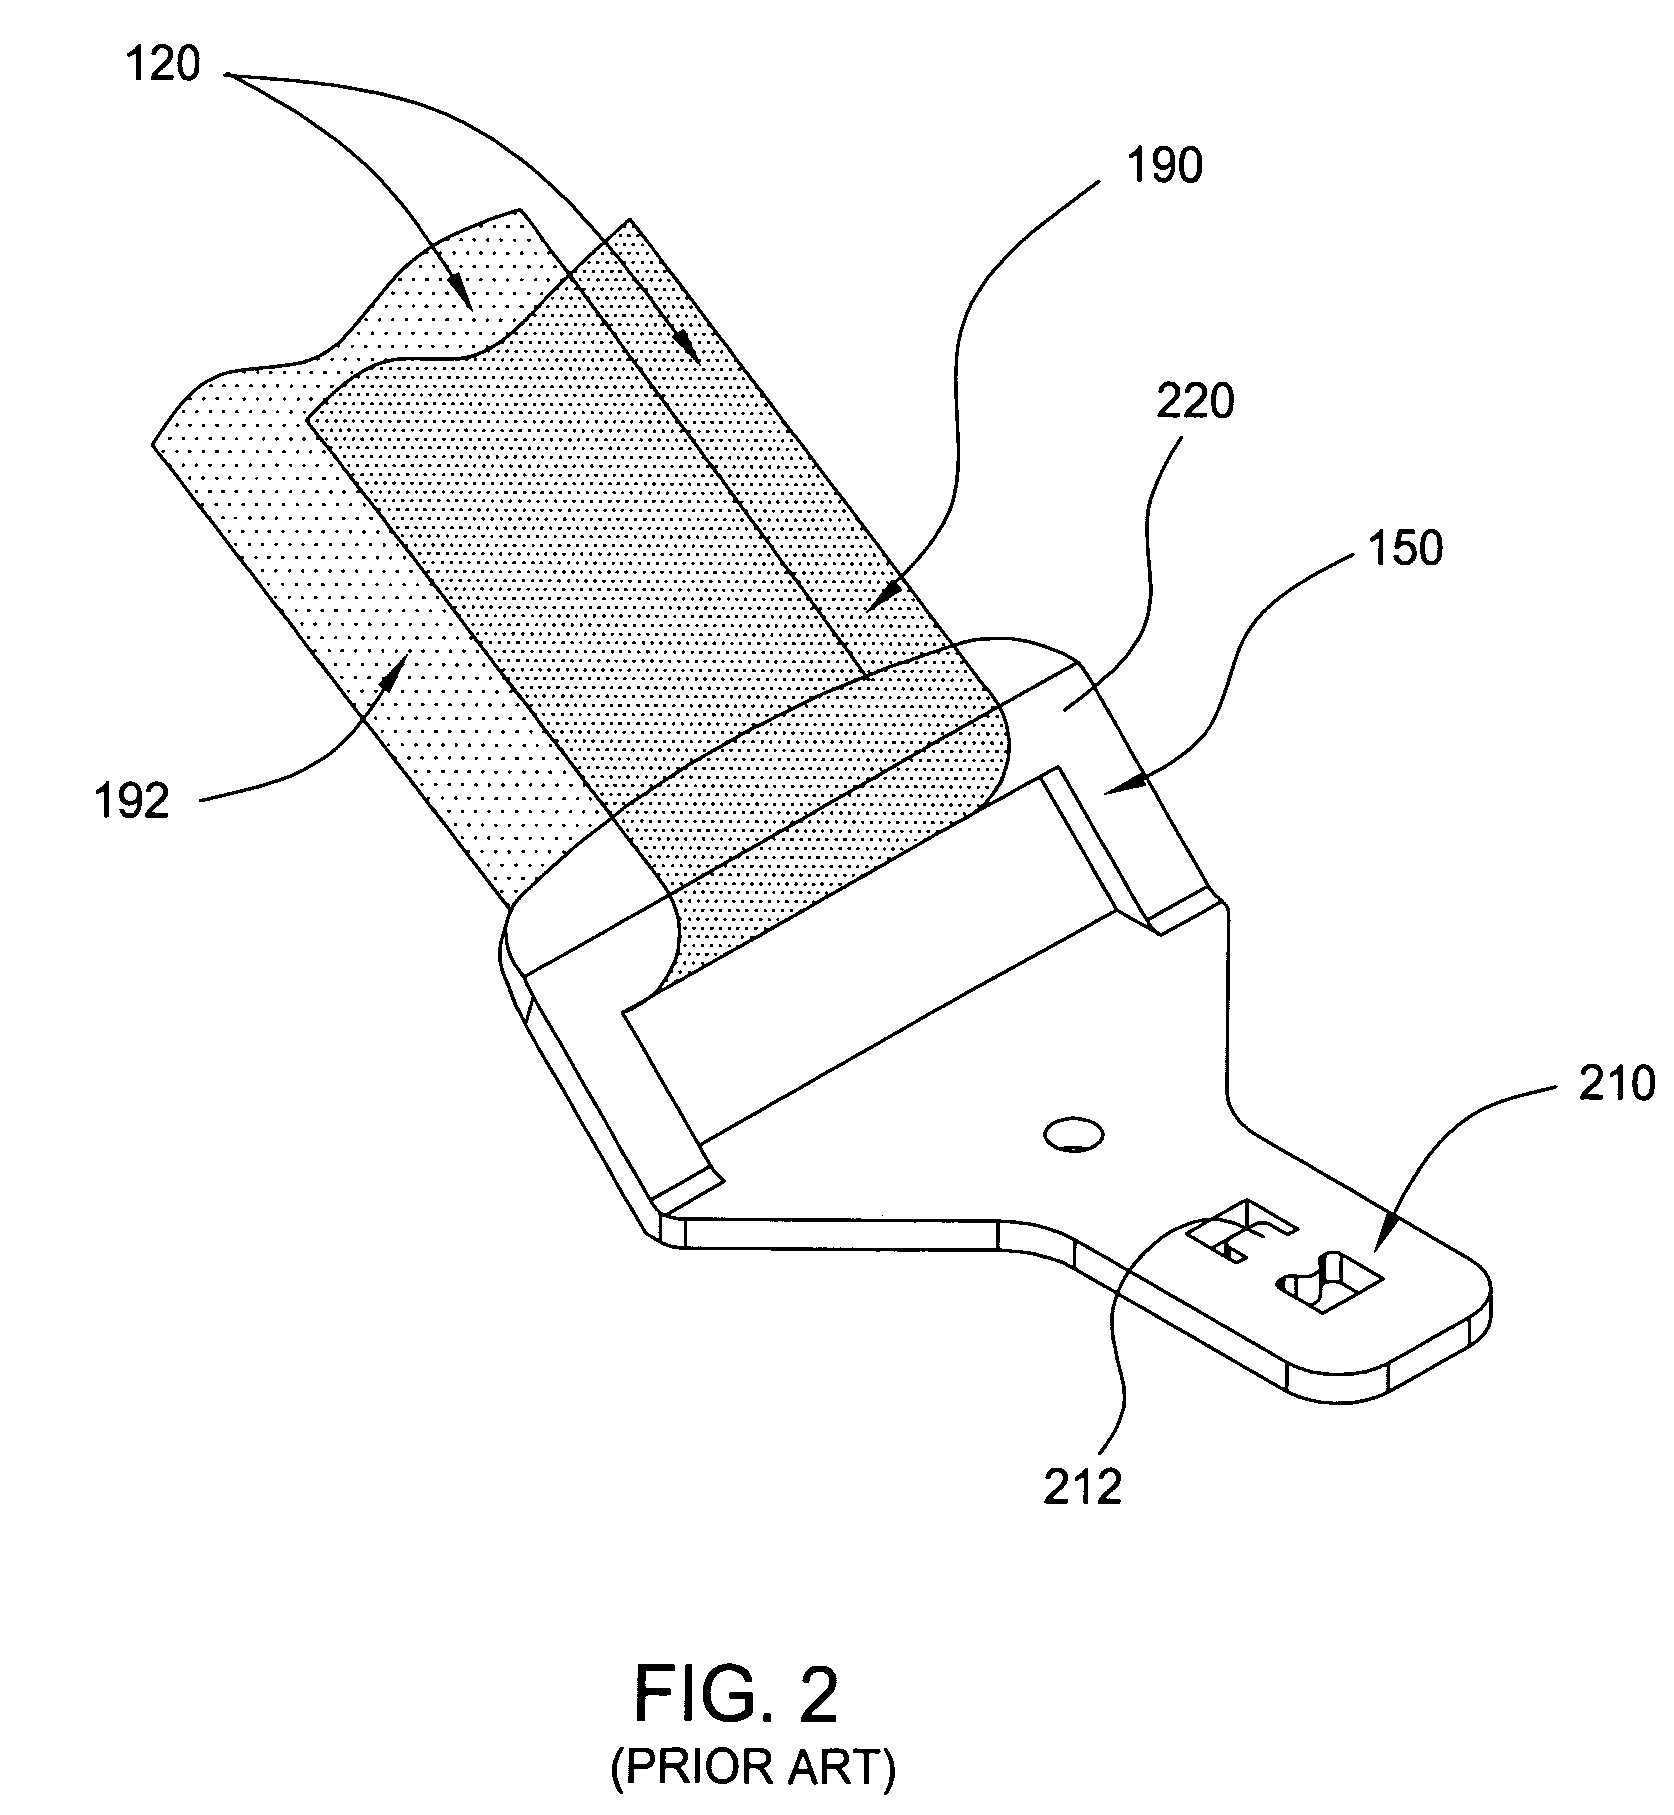 Method and apparatus for use on a safety belt system for restraining the movement of an occupant or child seat